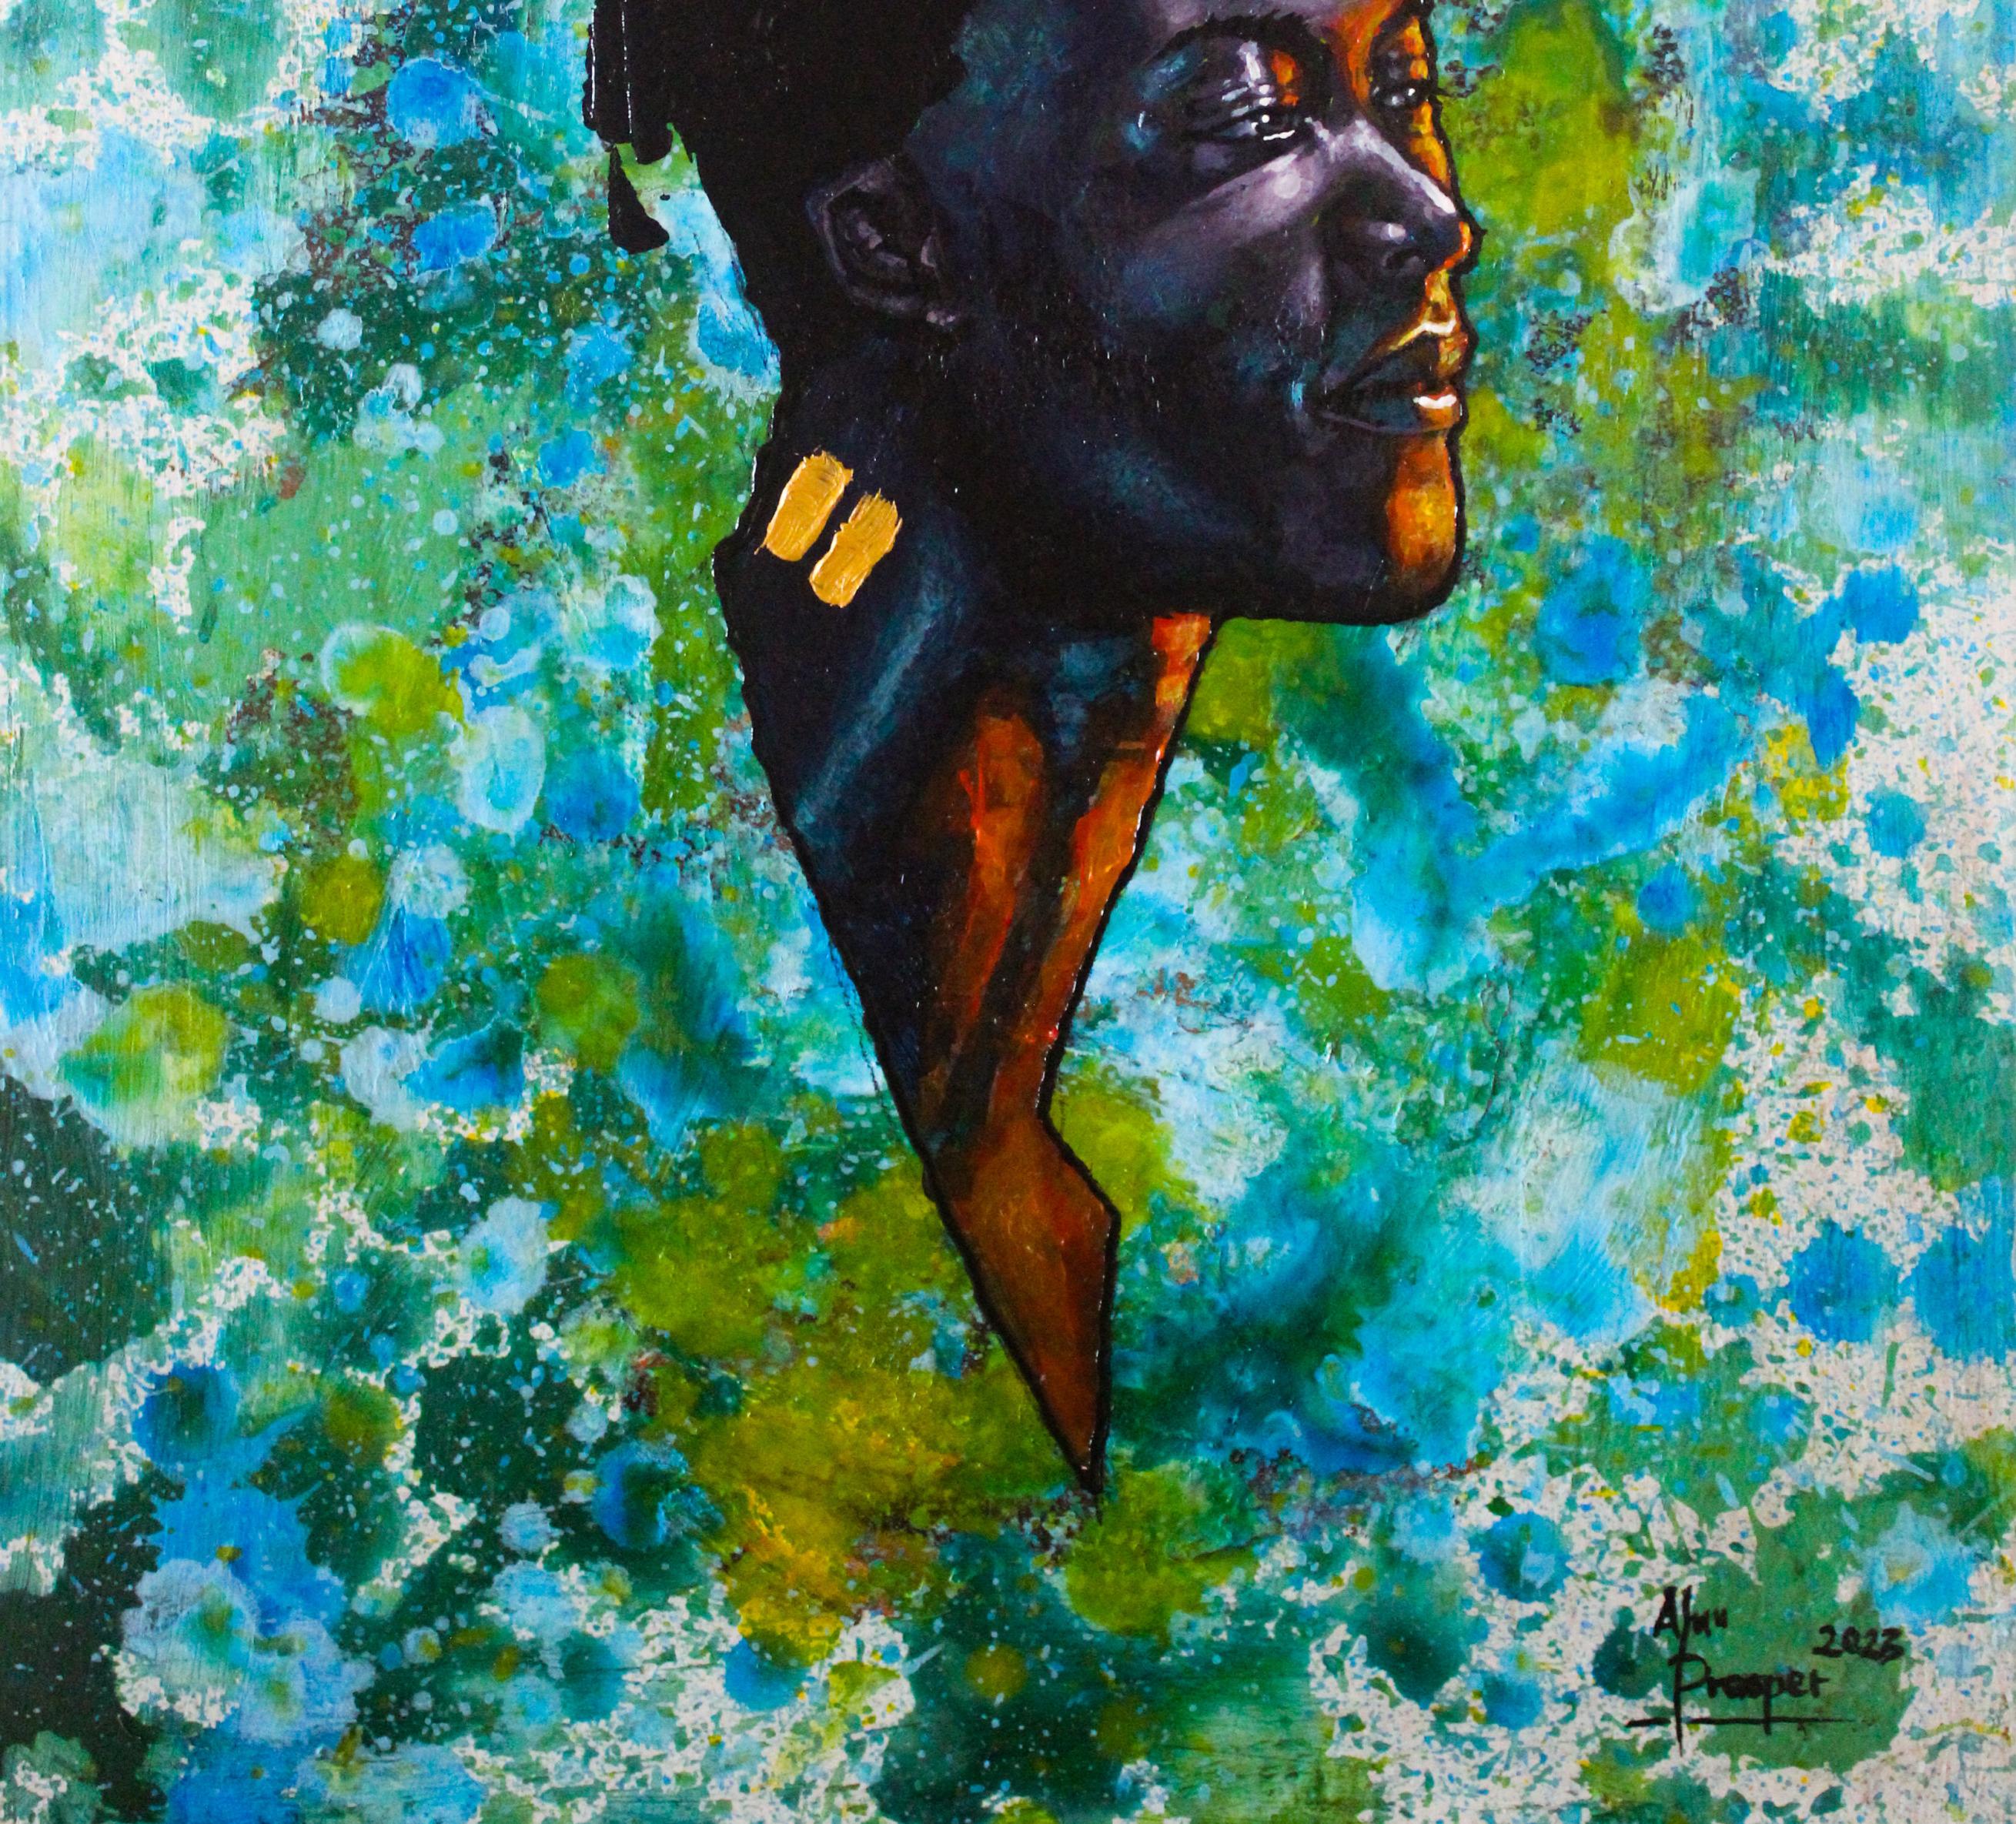 Golden Equality 1 - Neo-Expressionist Painting by Aluu Prosper Chigozie 